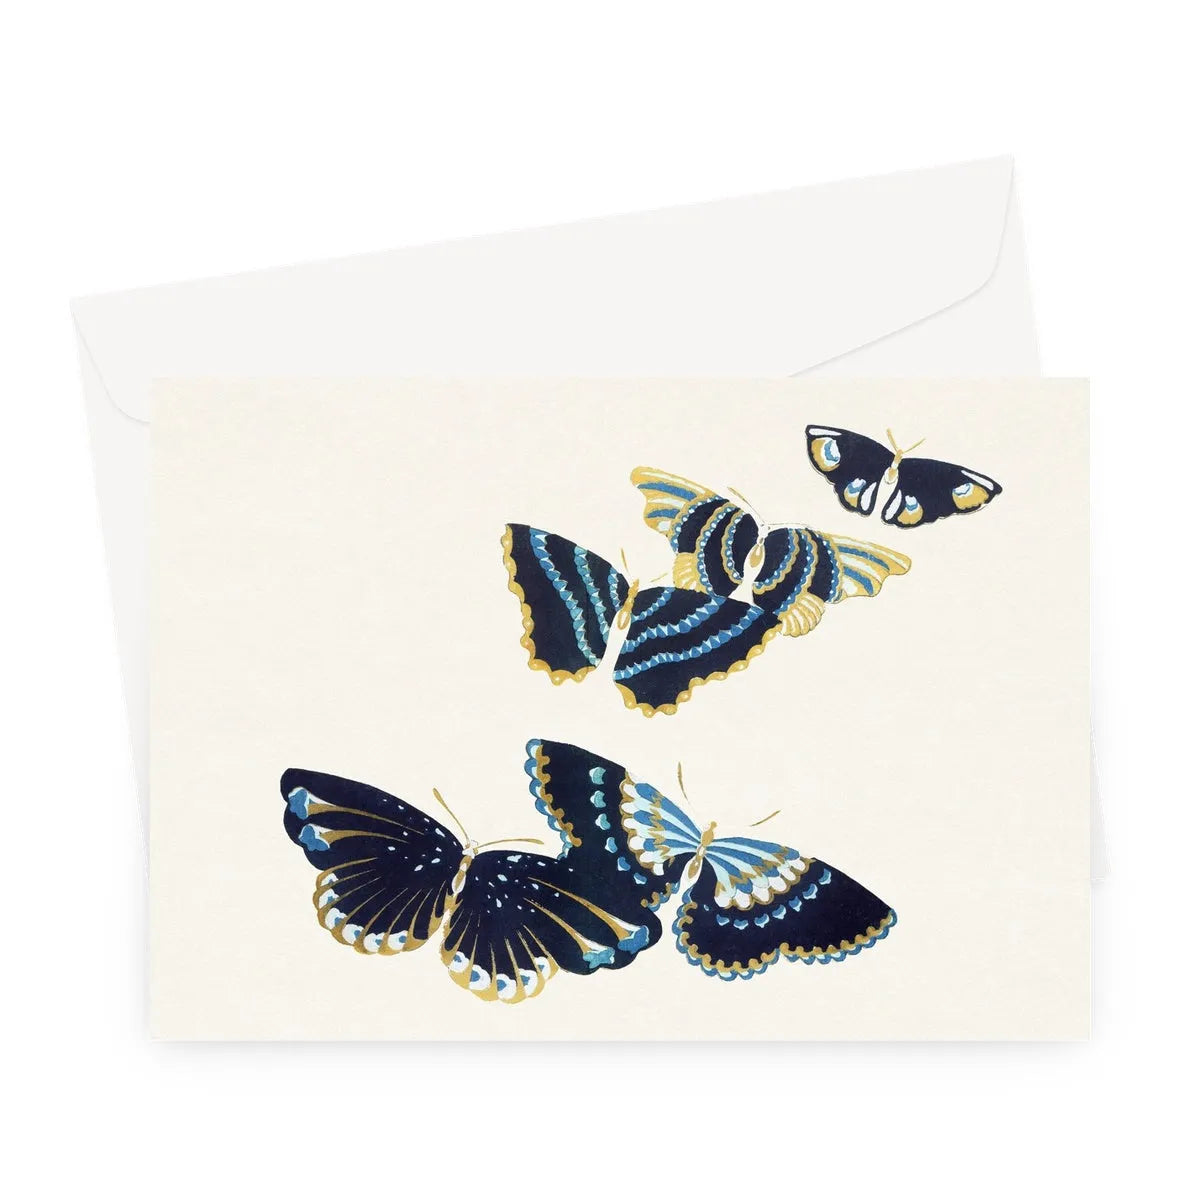 Japanese Butterflies In Blue Too By Kamisaka Sekka Greeting Card - A5 Landscape / 1 Card - Greeting & Note Cards